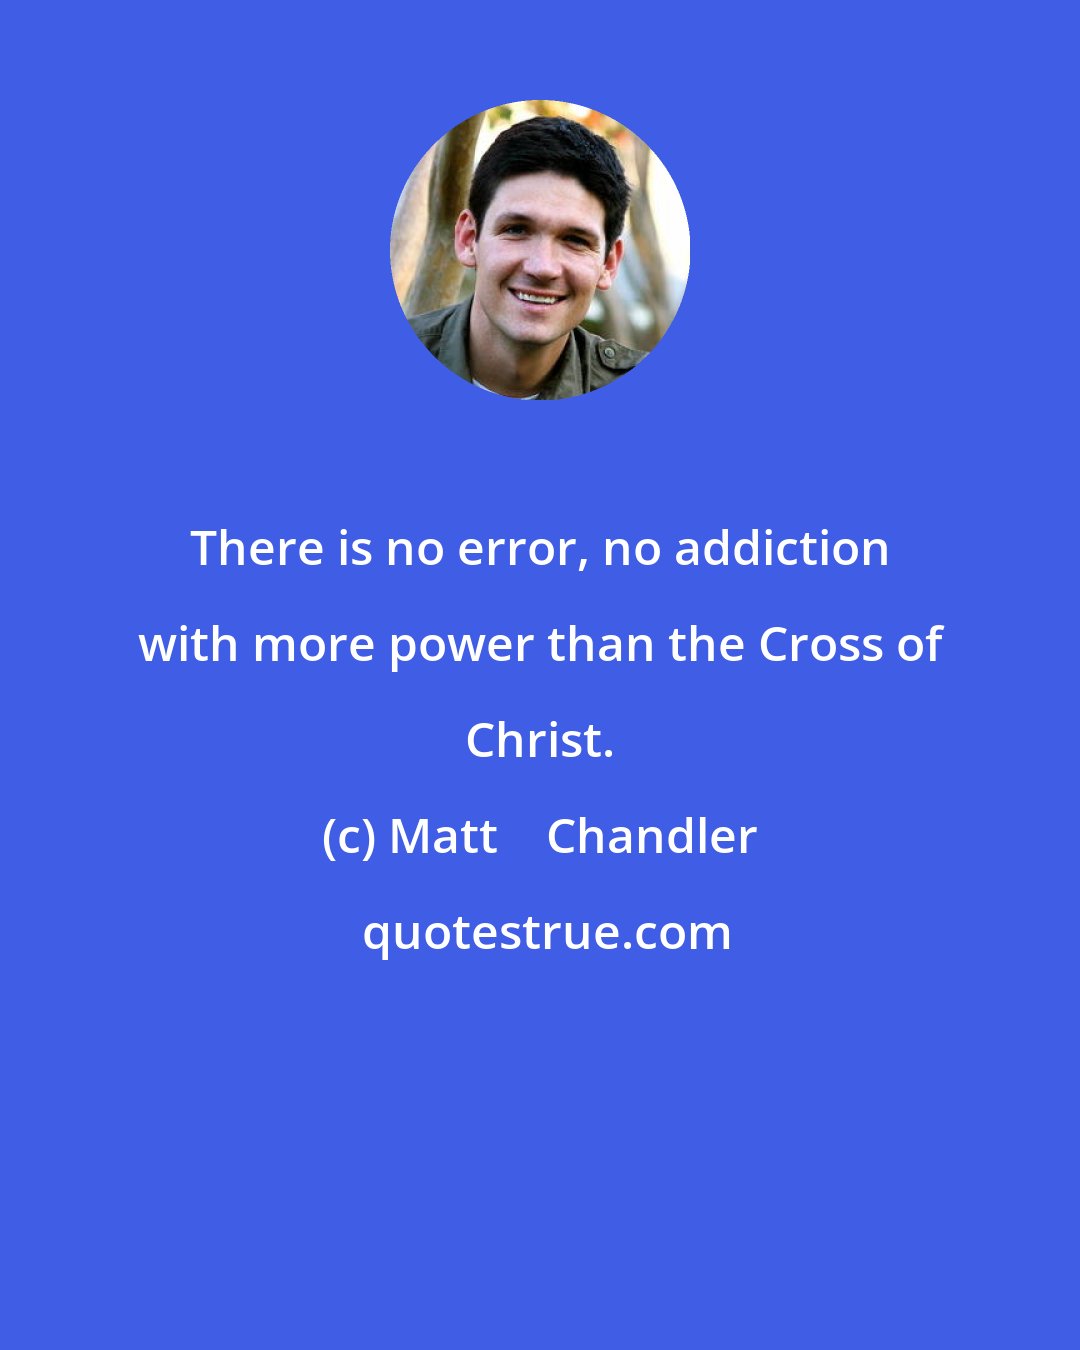 Matt    Chandler: There is no error, no addiction with more power than the Cross of Christ.